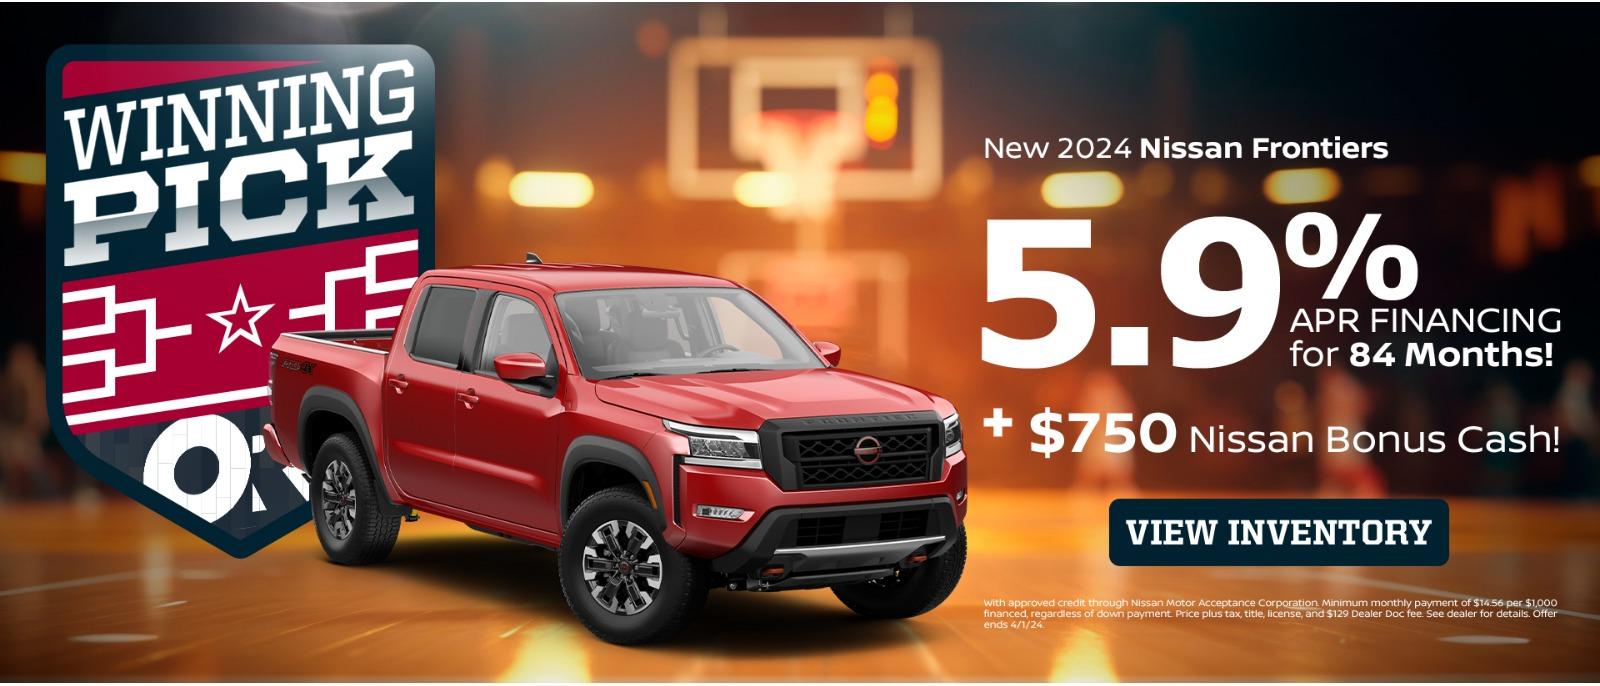 WINNING PICK *+ ON New 2024 Nissan Frontiers 5.9% APR FINANCING for 84 Months! + $750 Nissan Bonus Cash! VIEW INVENTORY with approved credit through Nissan Motor Acceptance Corporation Minimum monthly payment of $1456 per $1,000 financed, regardless of down payment Price plus tax, title, license, and $129 Dealer Doc fee See dealer for details. Offer ends 4/1/24